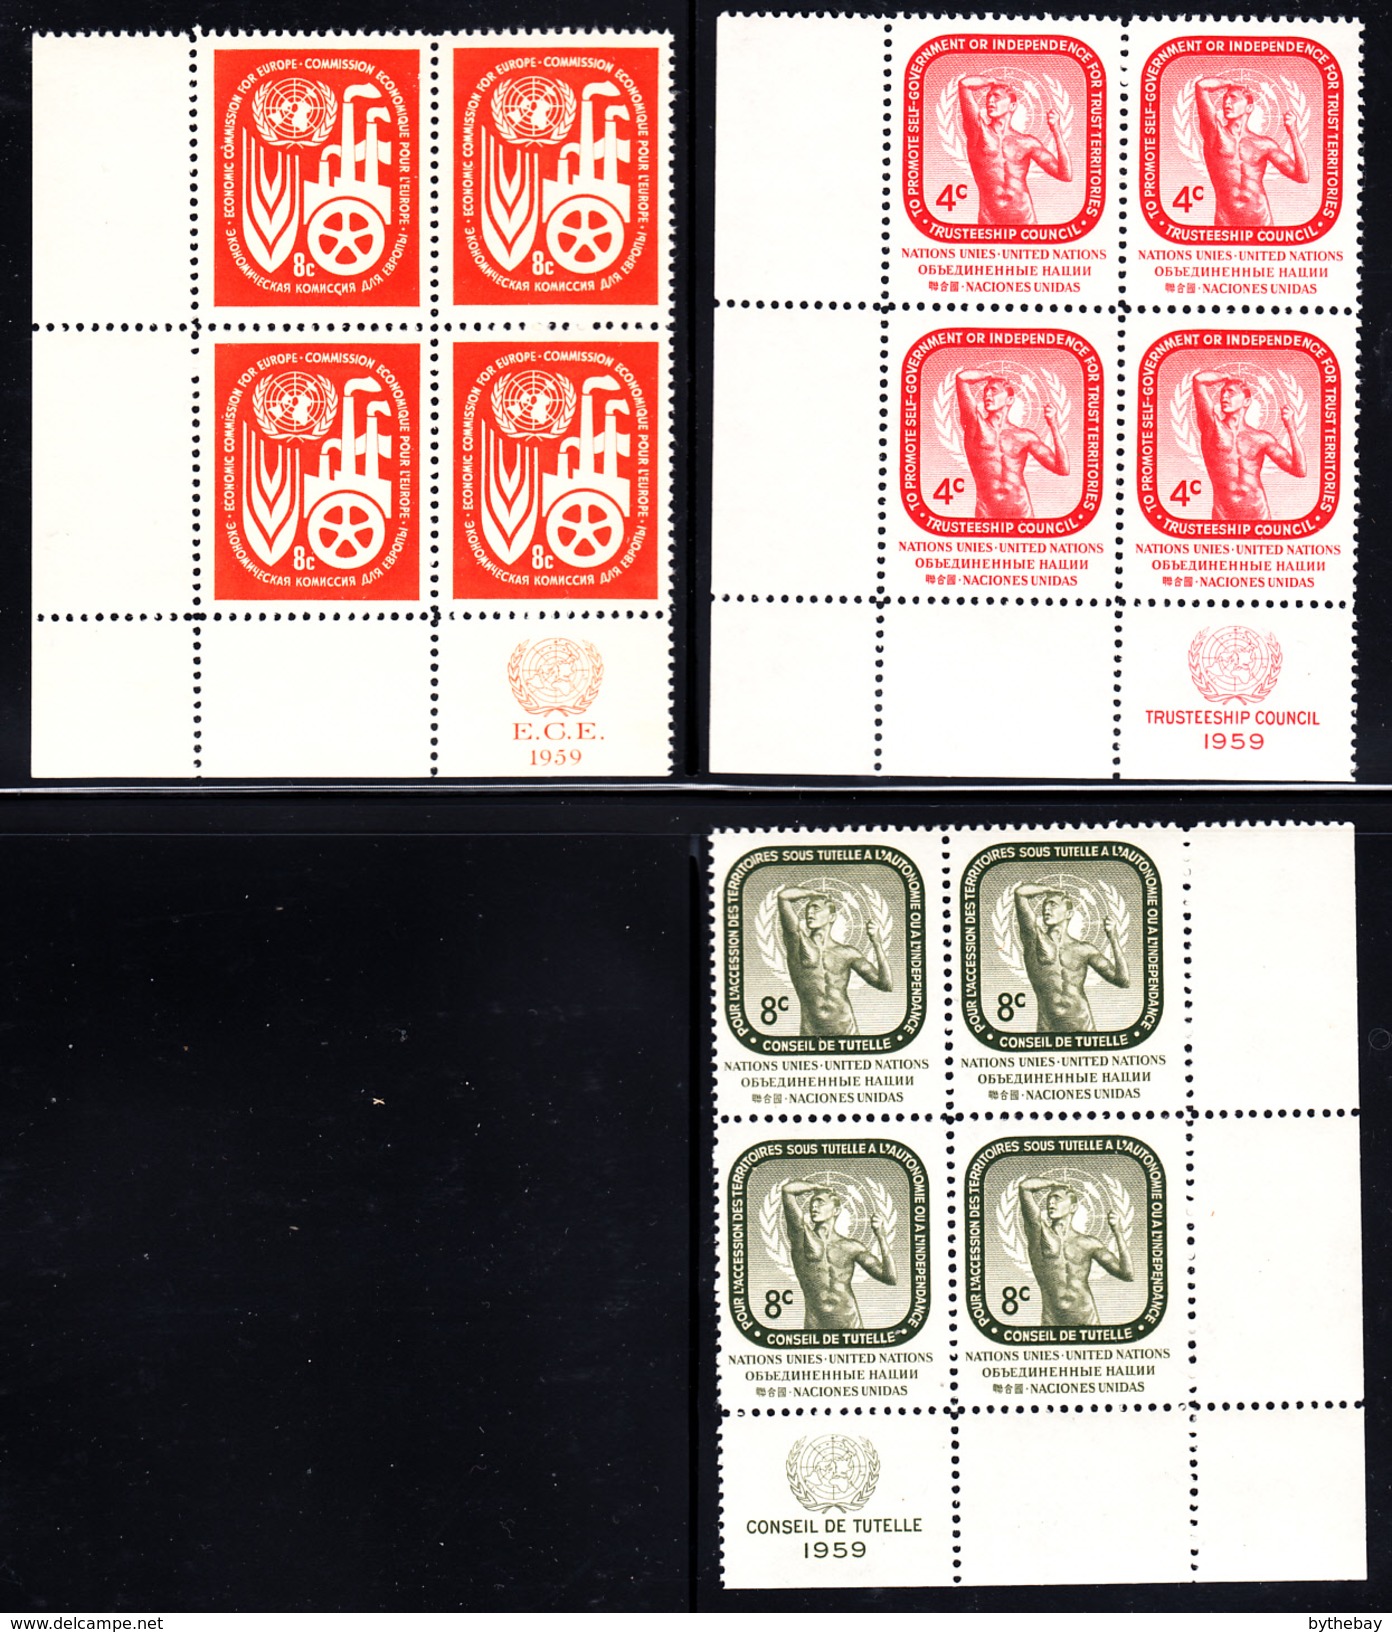 United Nations NY MNH Collection of 37 different Corner Blocks of 4 1950s Issues